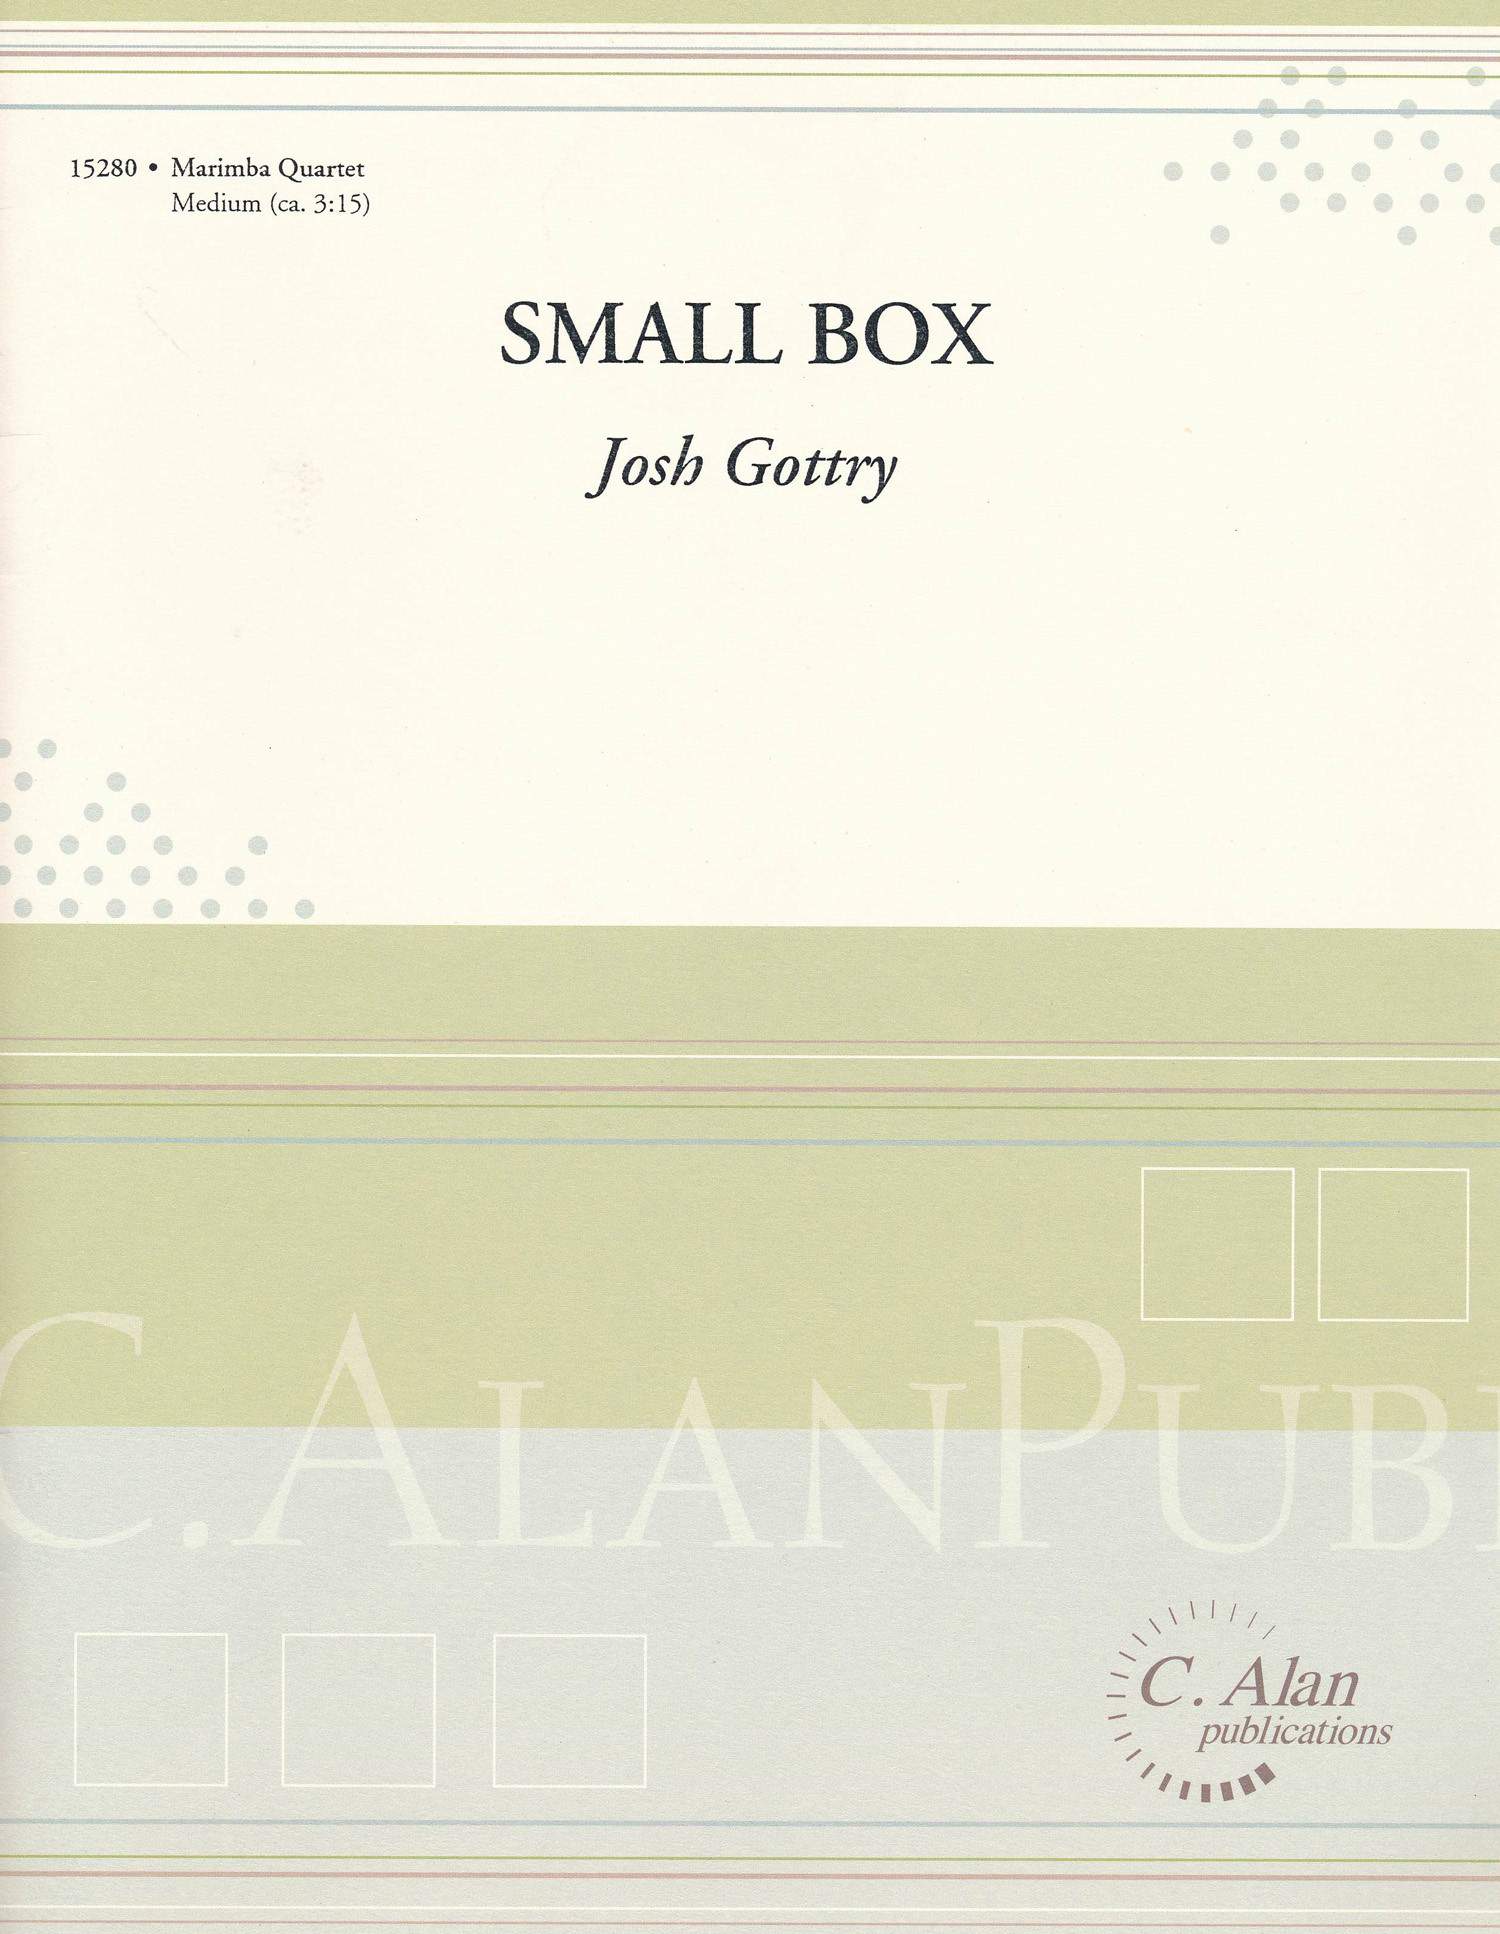 Small Box by Josh Gottry